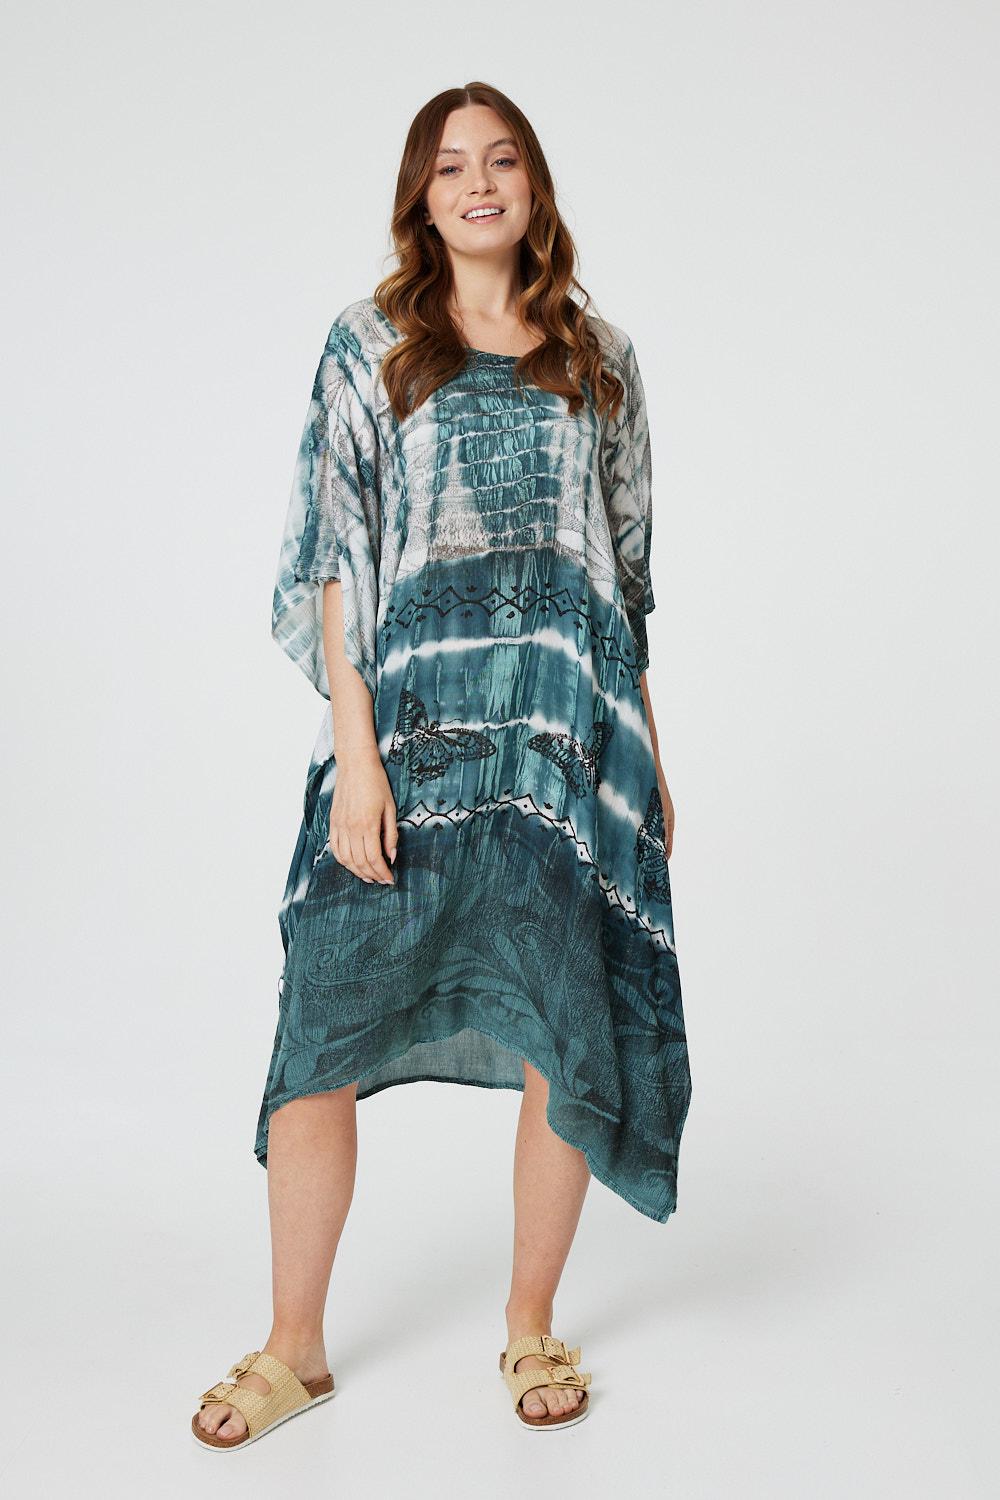 Teal | Tie Dye Relaxed Tunic Blouse